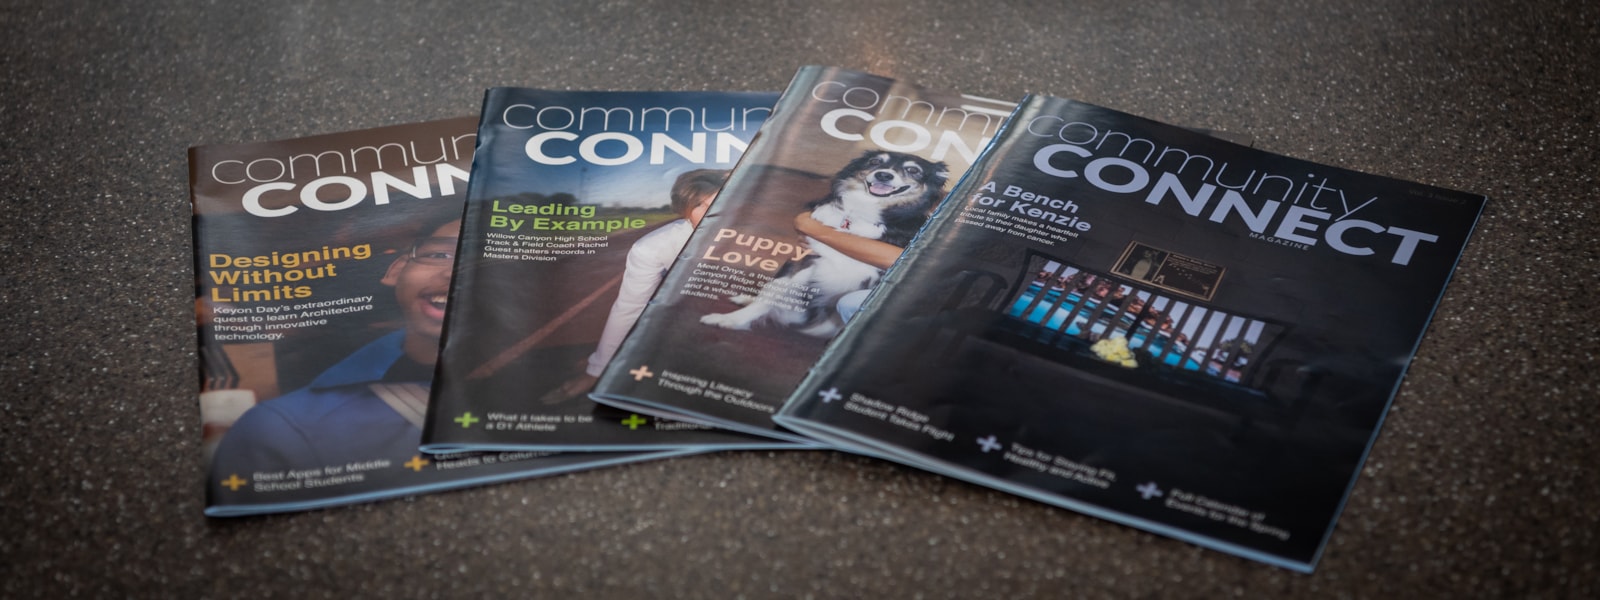 Community Connect Magazines laying on table